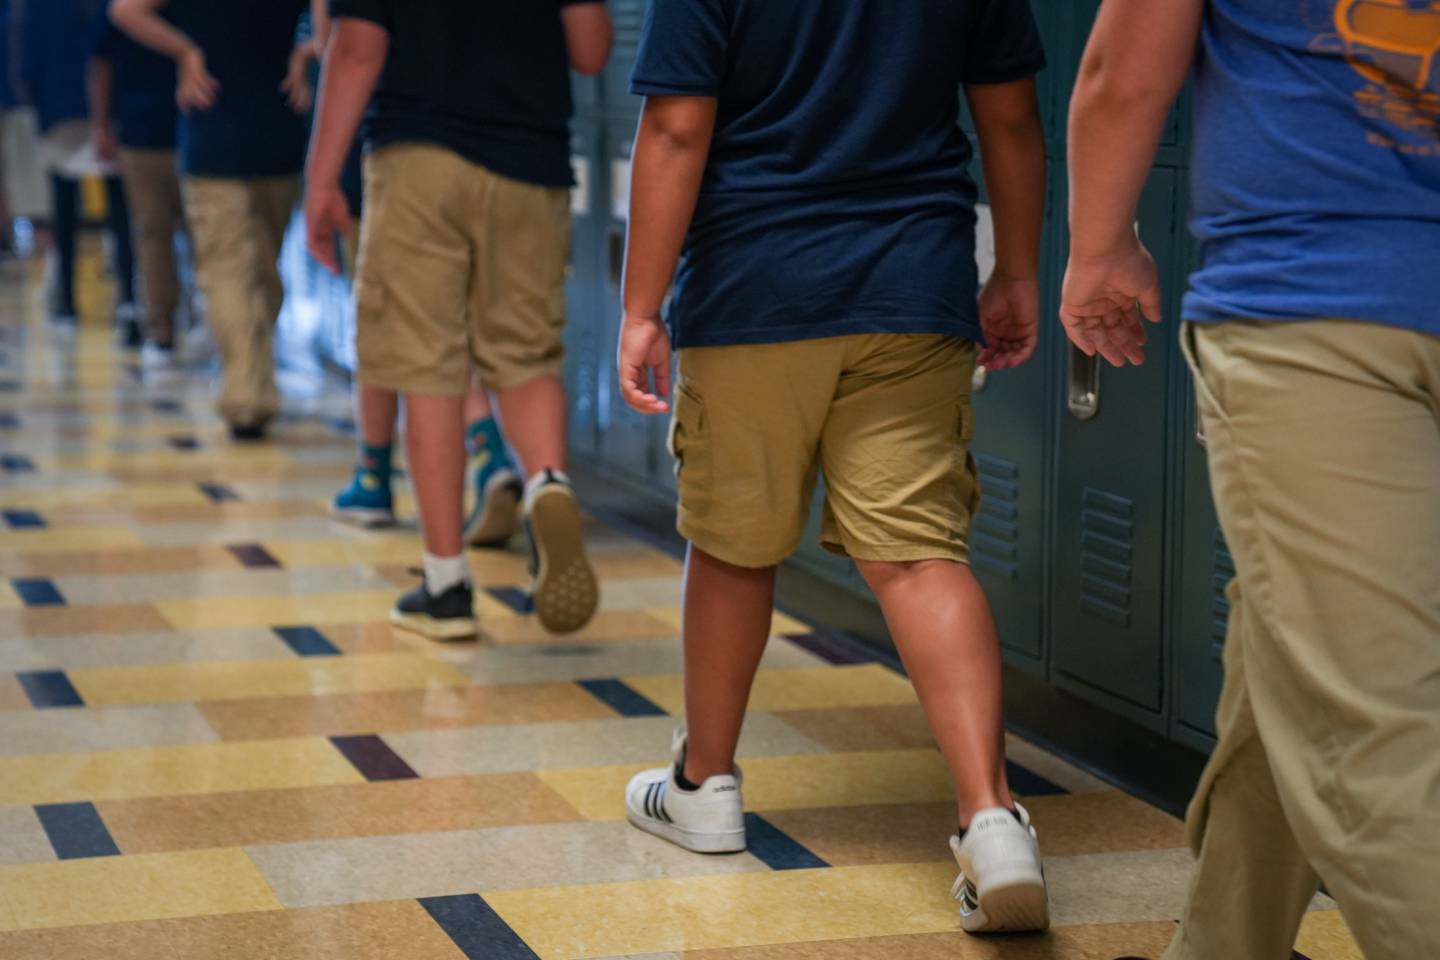 Students walk through the hall inside Hampstead Hill Academy on 8/29/22. Monday was the first day back to school for Baltimore City students.